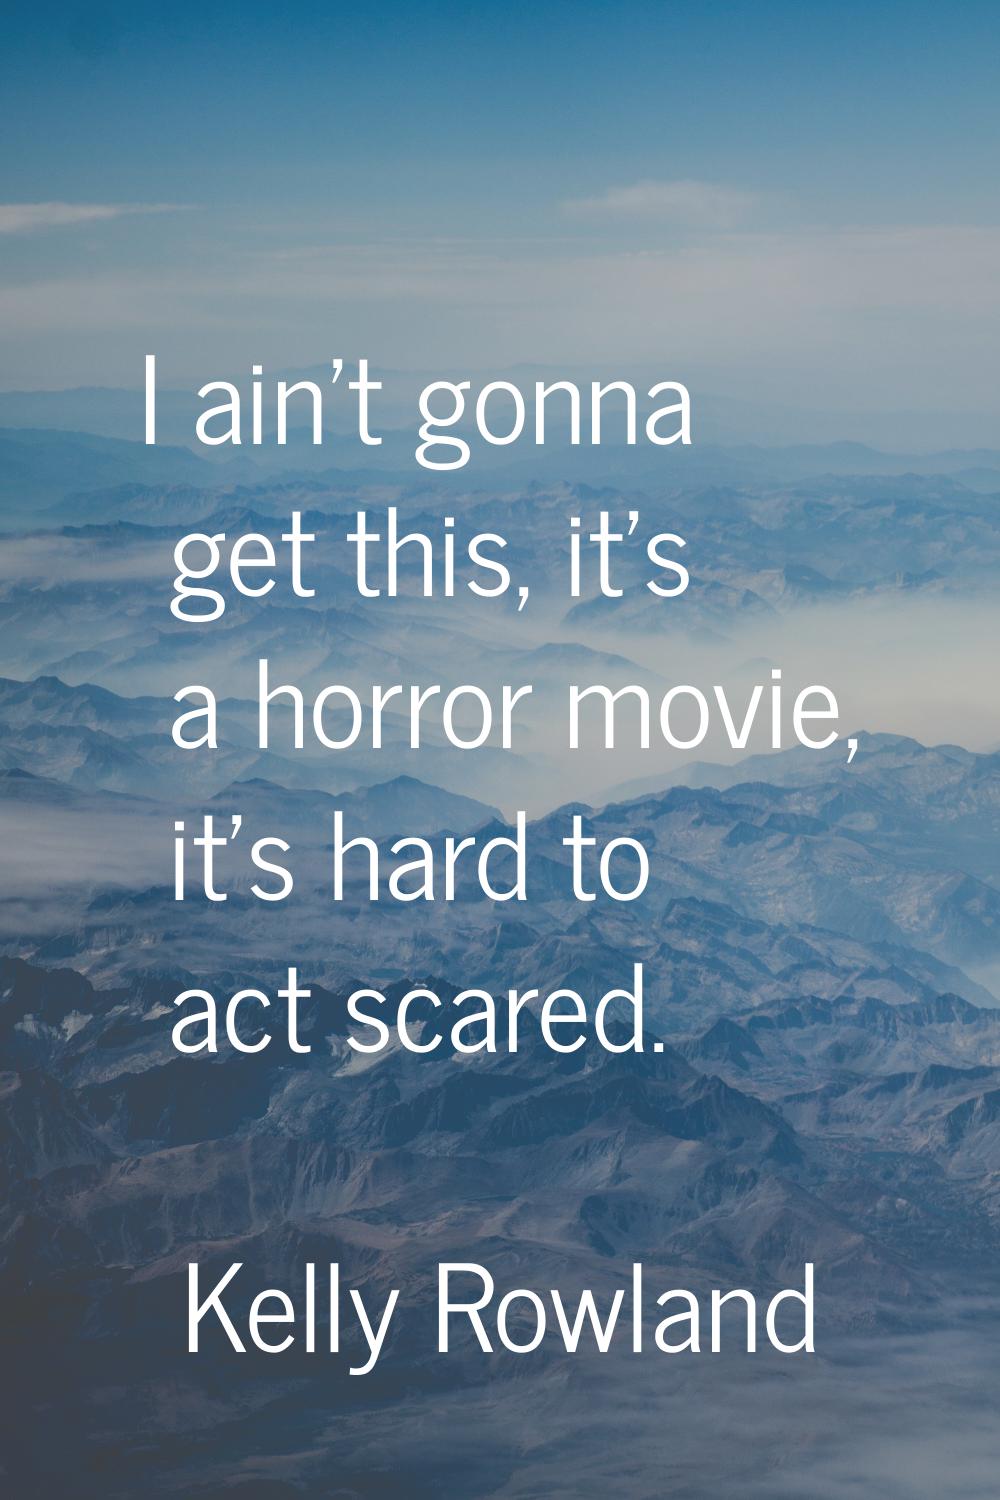 I ain't gonna get this, it's a horror movie, it's hard to act scared.